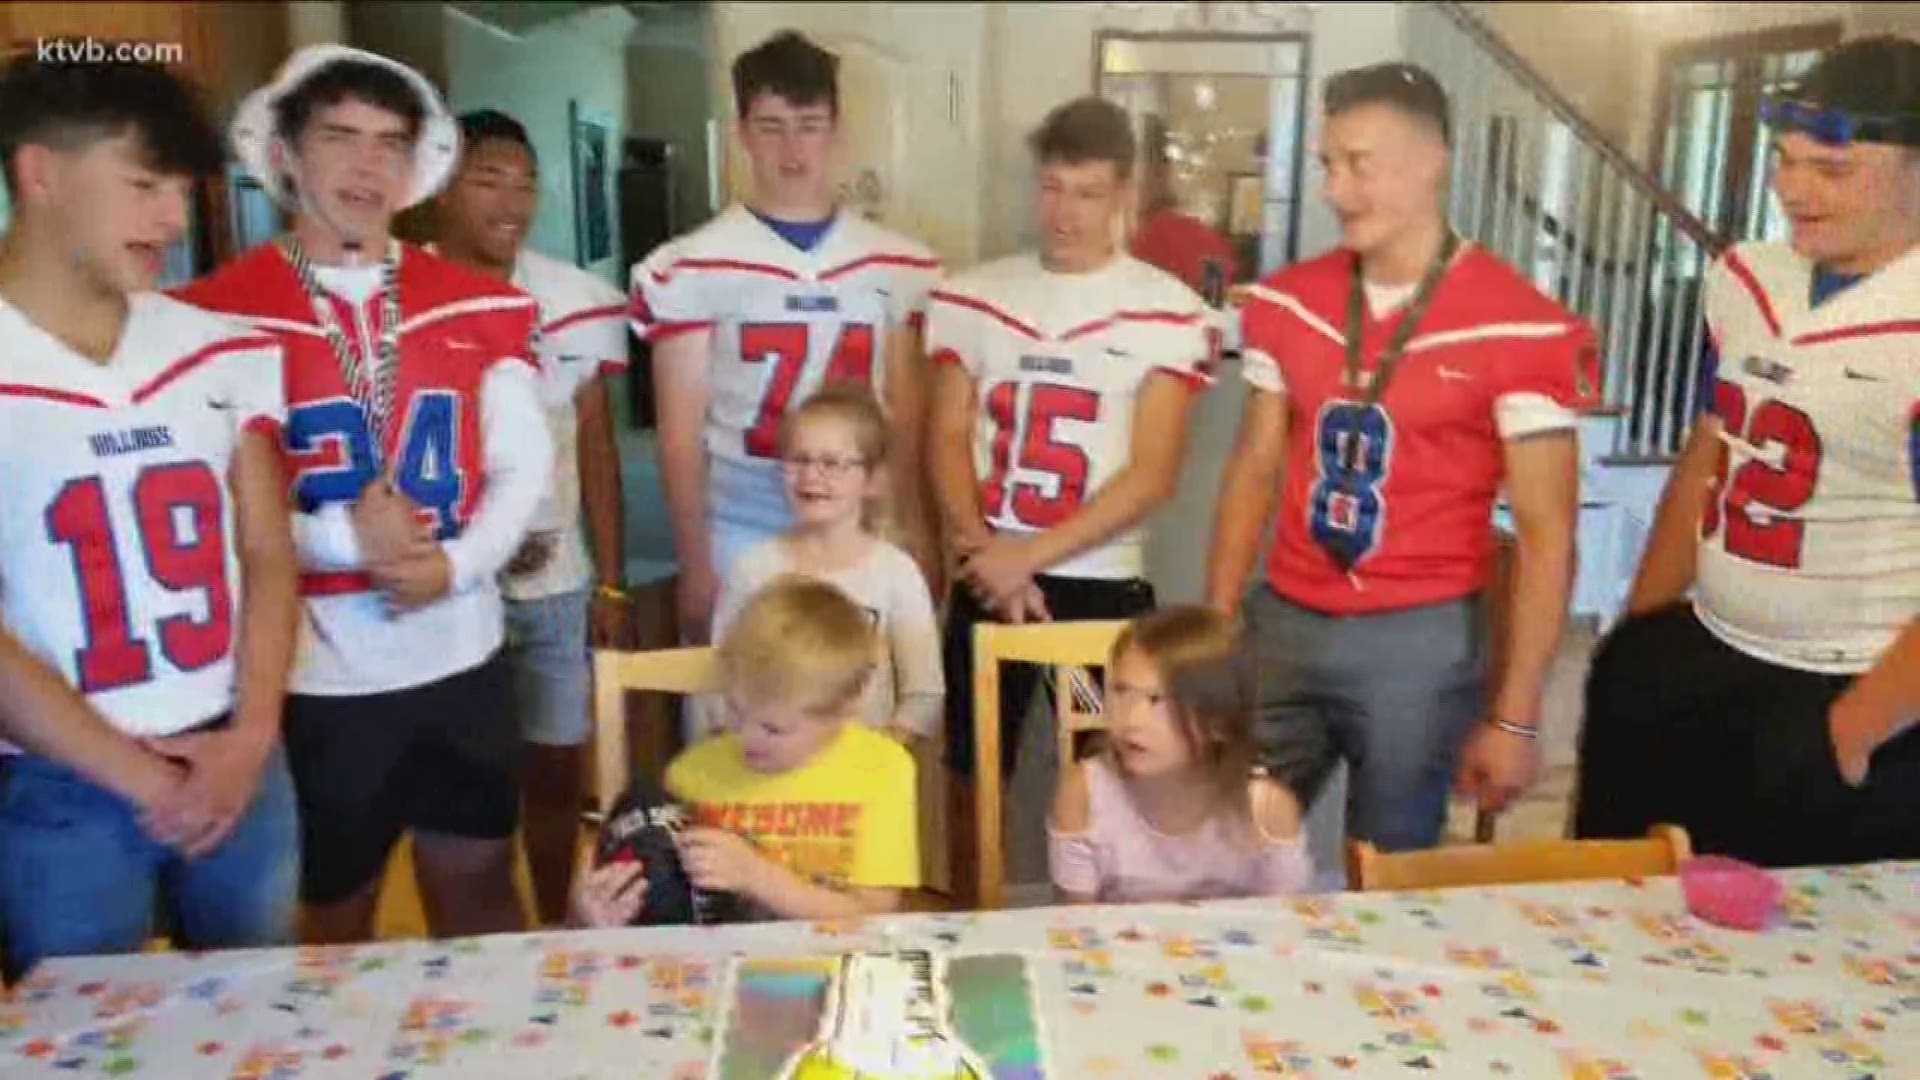 Last week, the Nampa High School football team went viral when they went to a nine-year-old boy's birthday party after only one person RSVP'd. After the story went viral across the country and around the world, they say their focus is on becoming young leaders and better people.